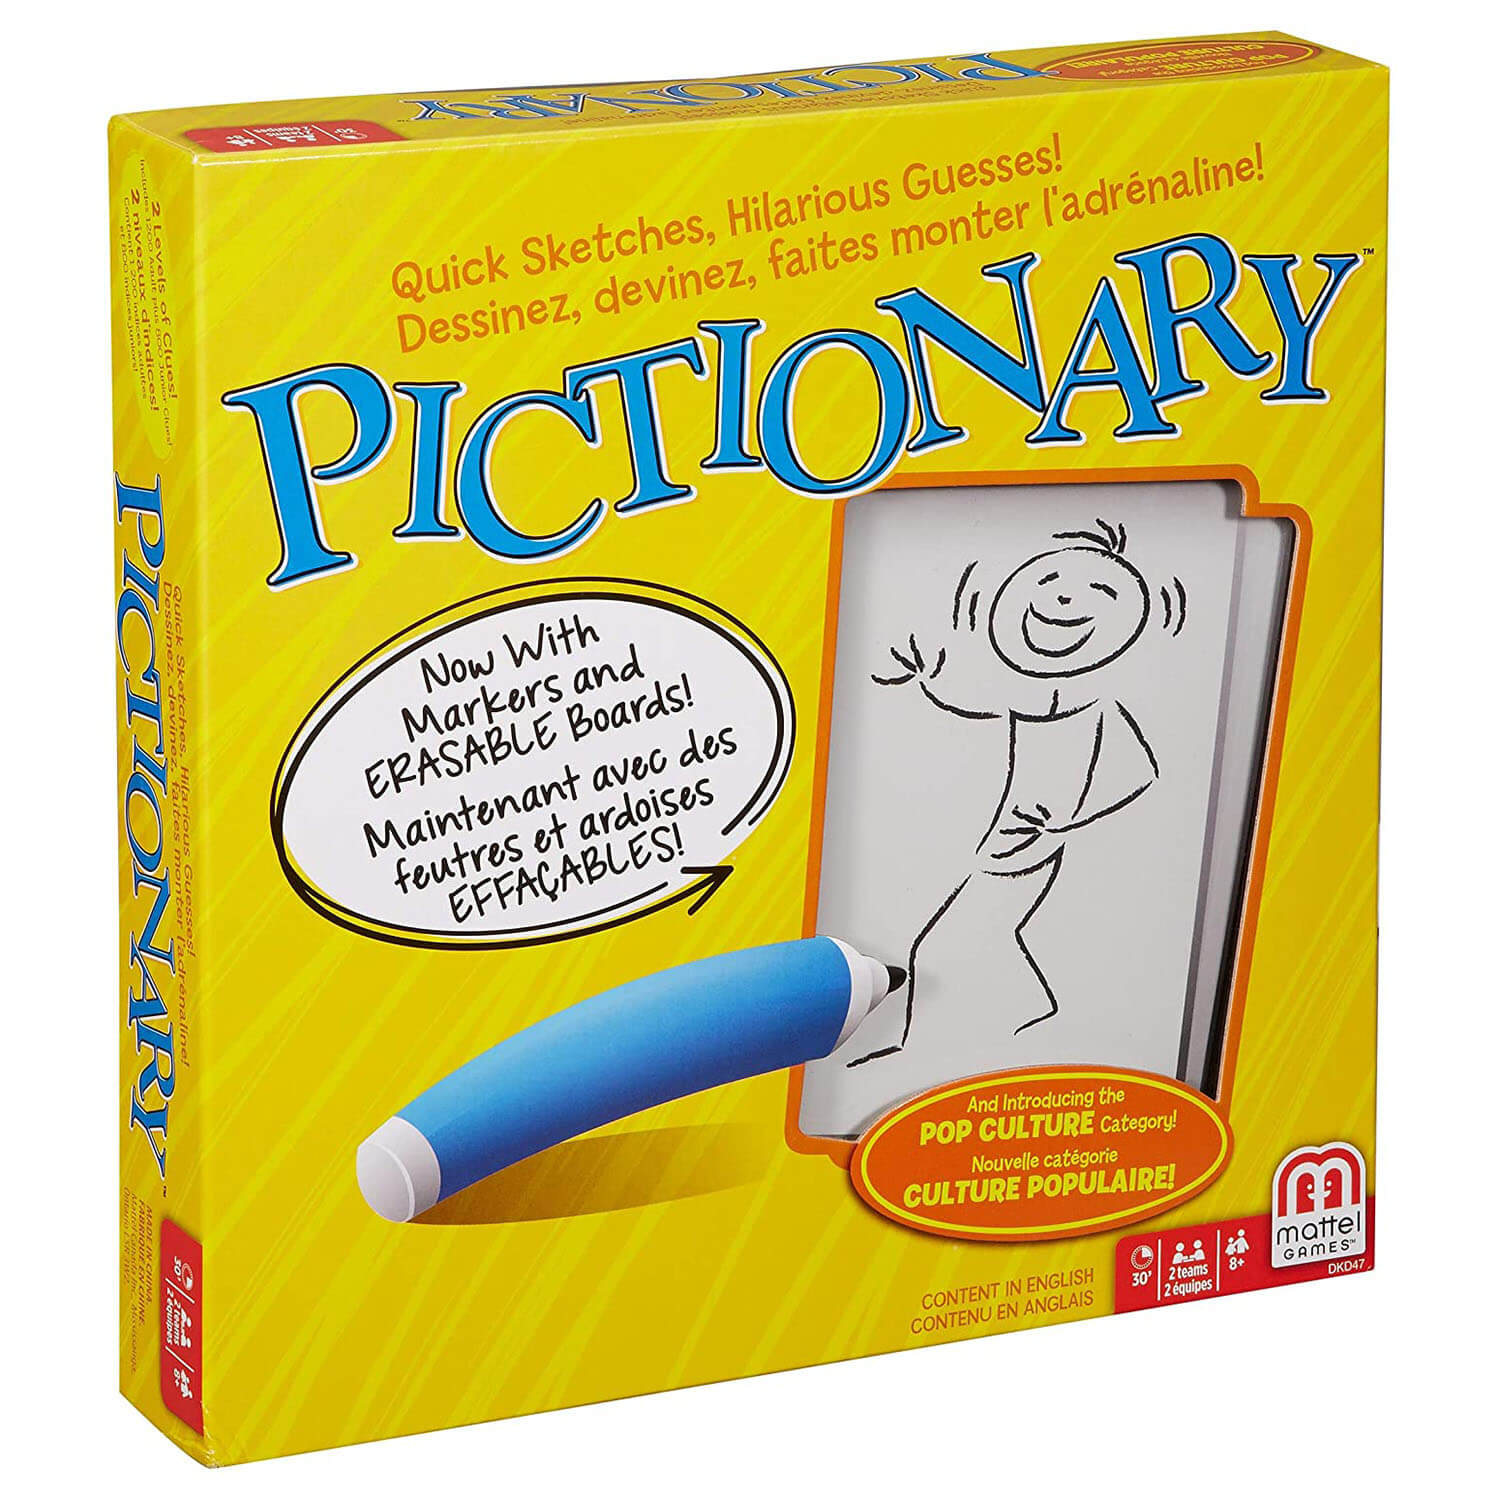 Front view of the Pictionary Board Game package.